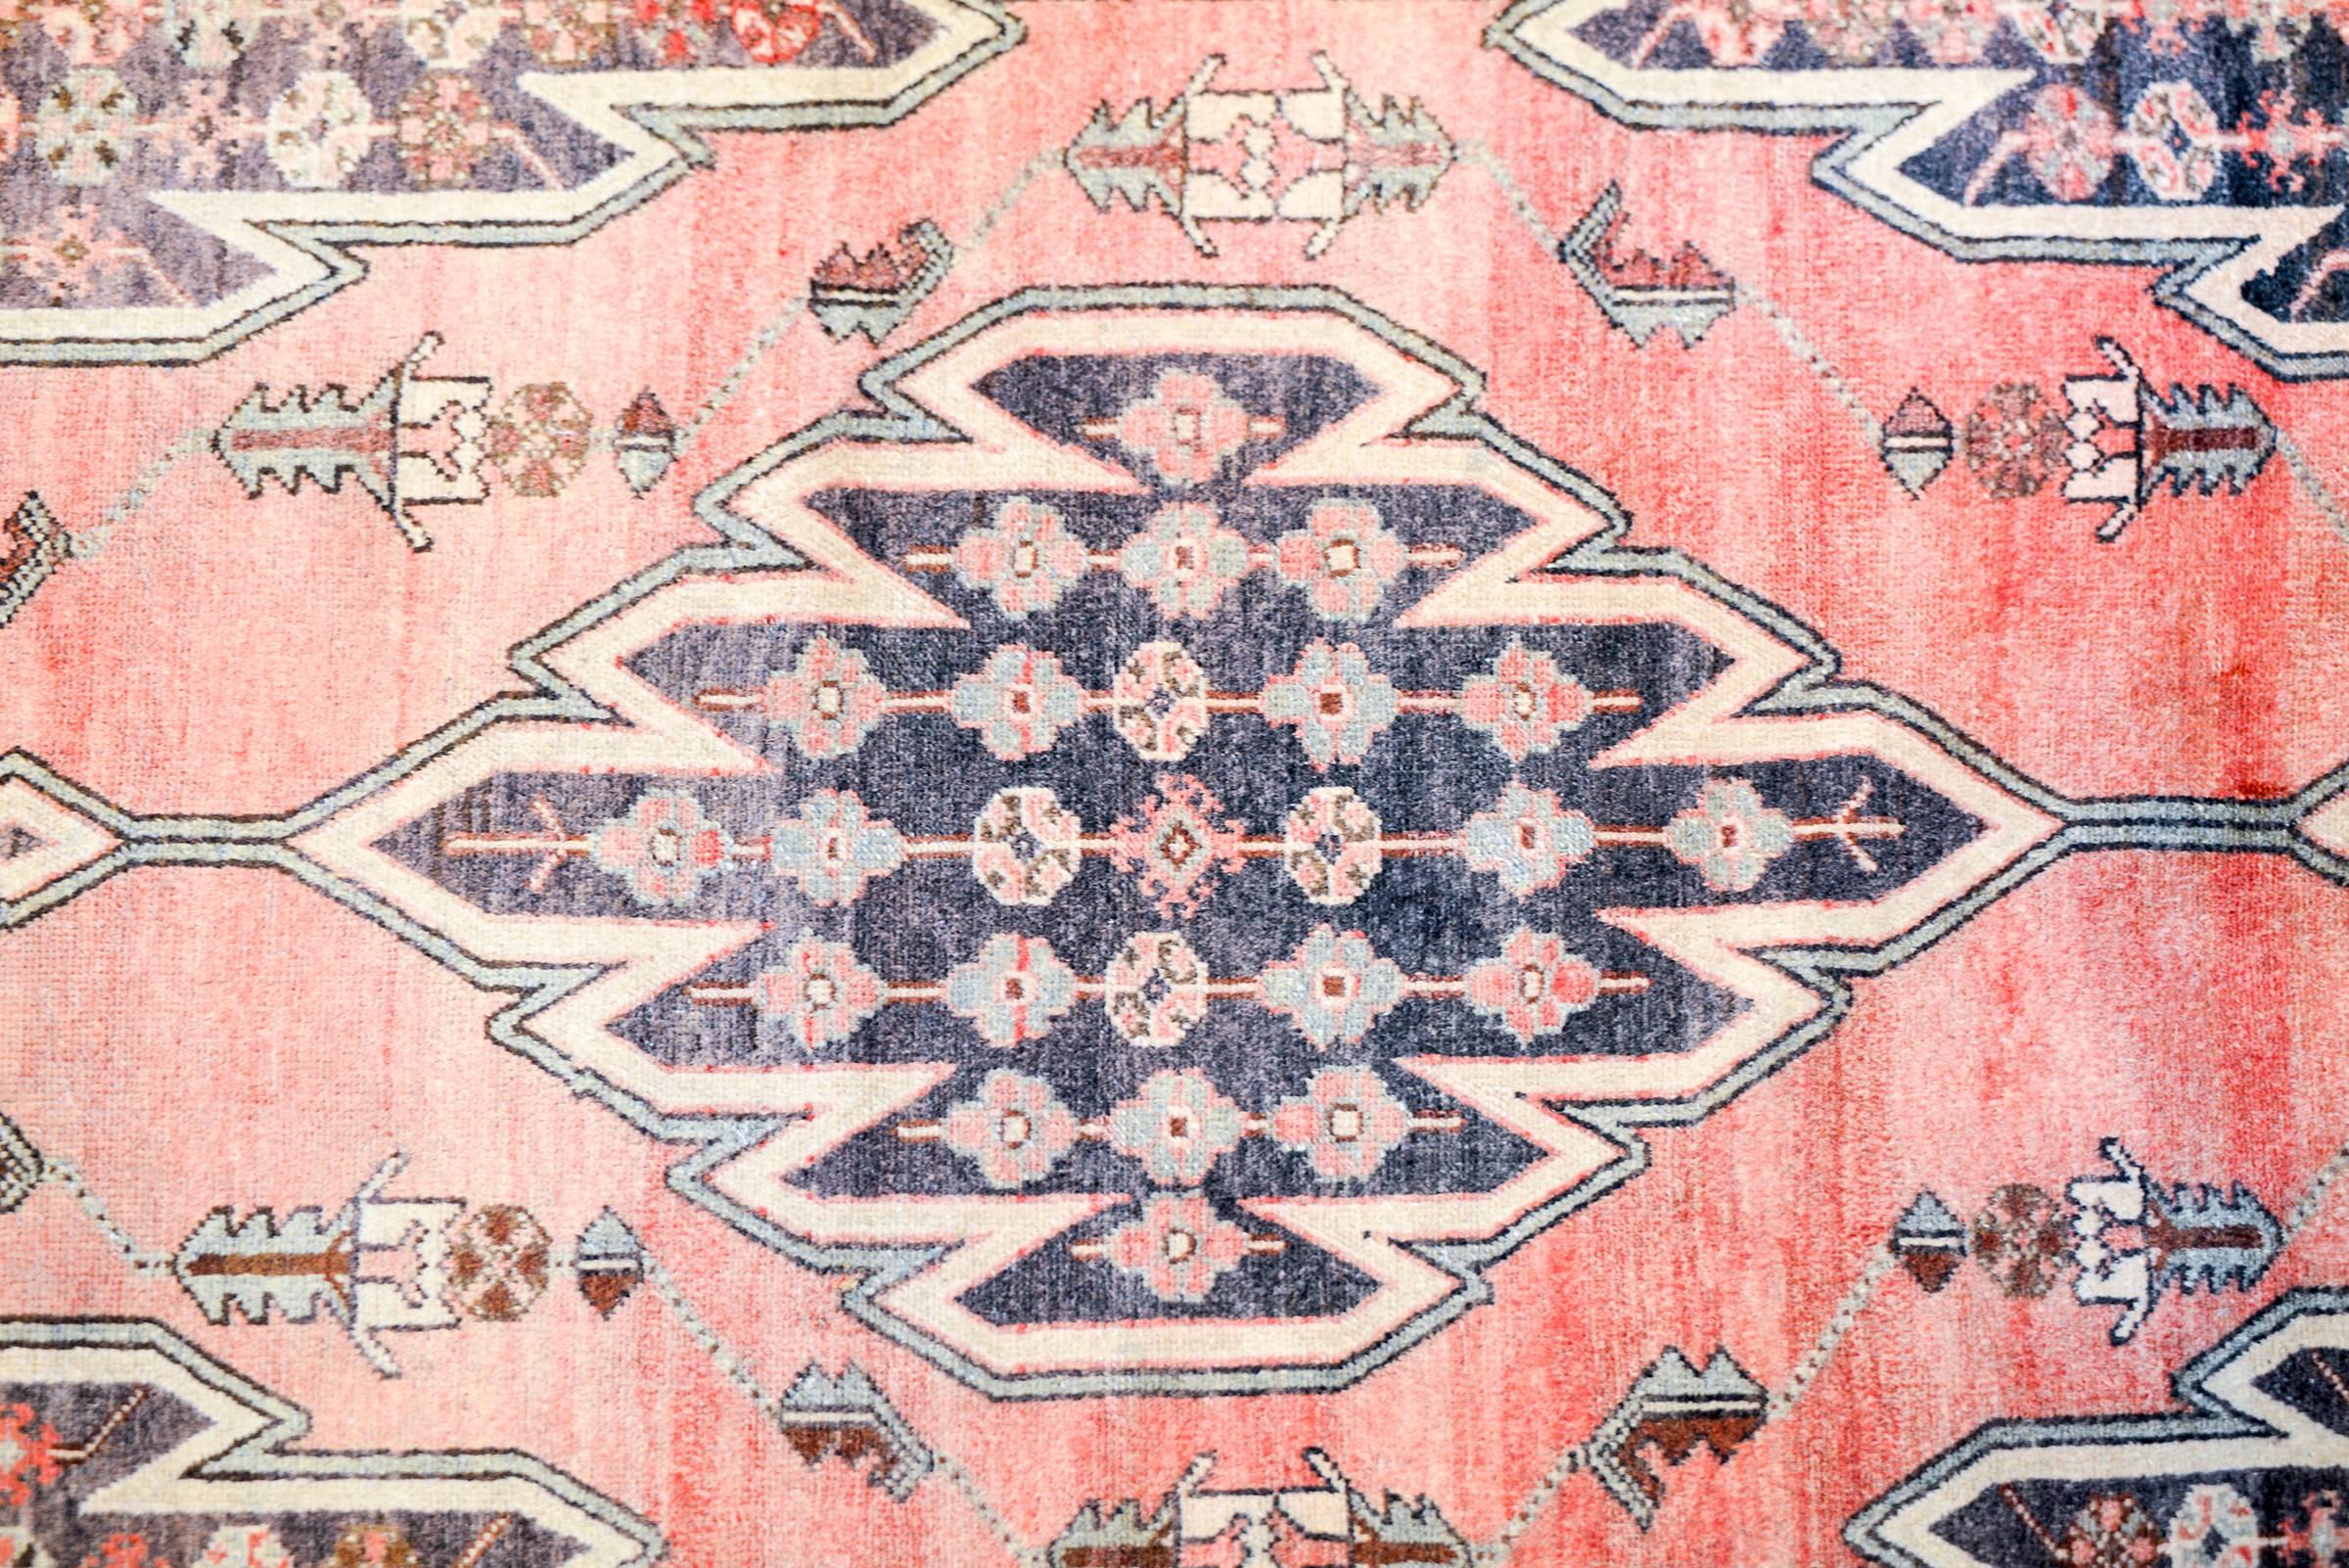 A gorgeous early 20th century Persian Malayar rug with a beautiful central diamond medallion with a an all-over floral pattern. The medallion is surrounded by a diamond field of abrash crimson with multiple leaves and stylized shrimp motifs,